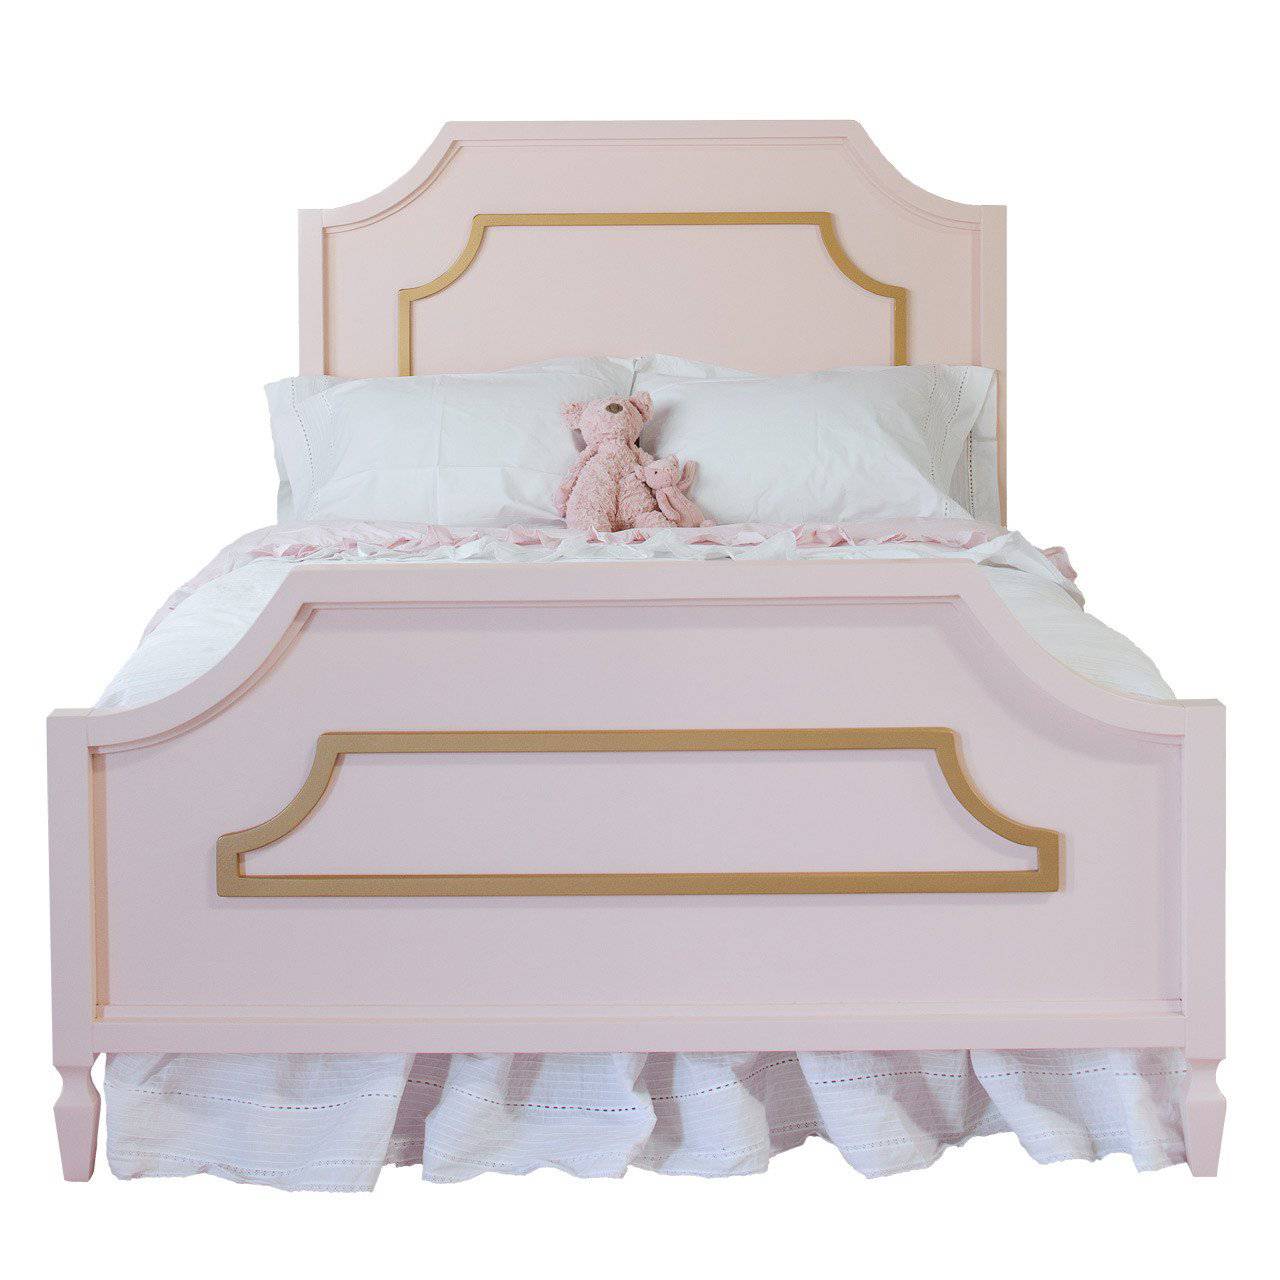 Beverly Bed with Molding - Twinkle Twinkle Little One